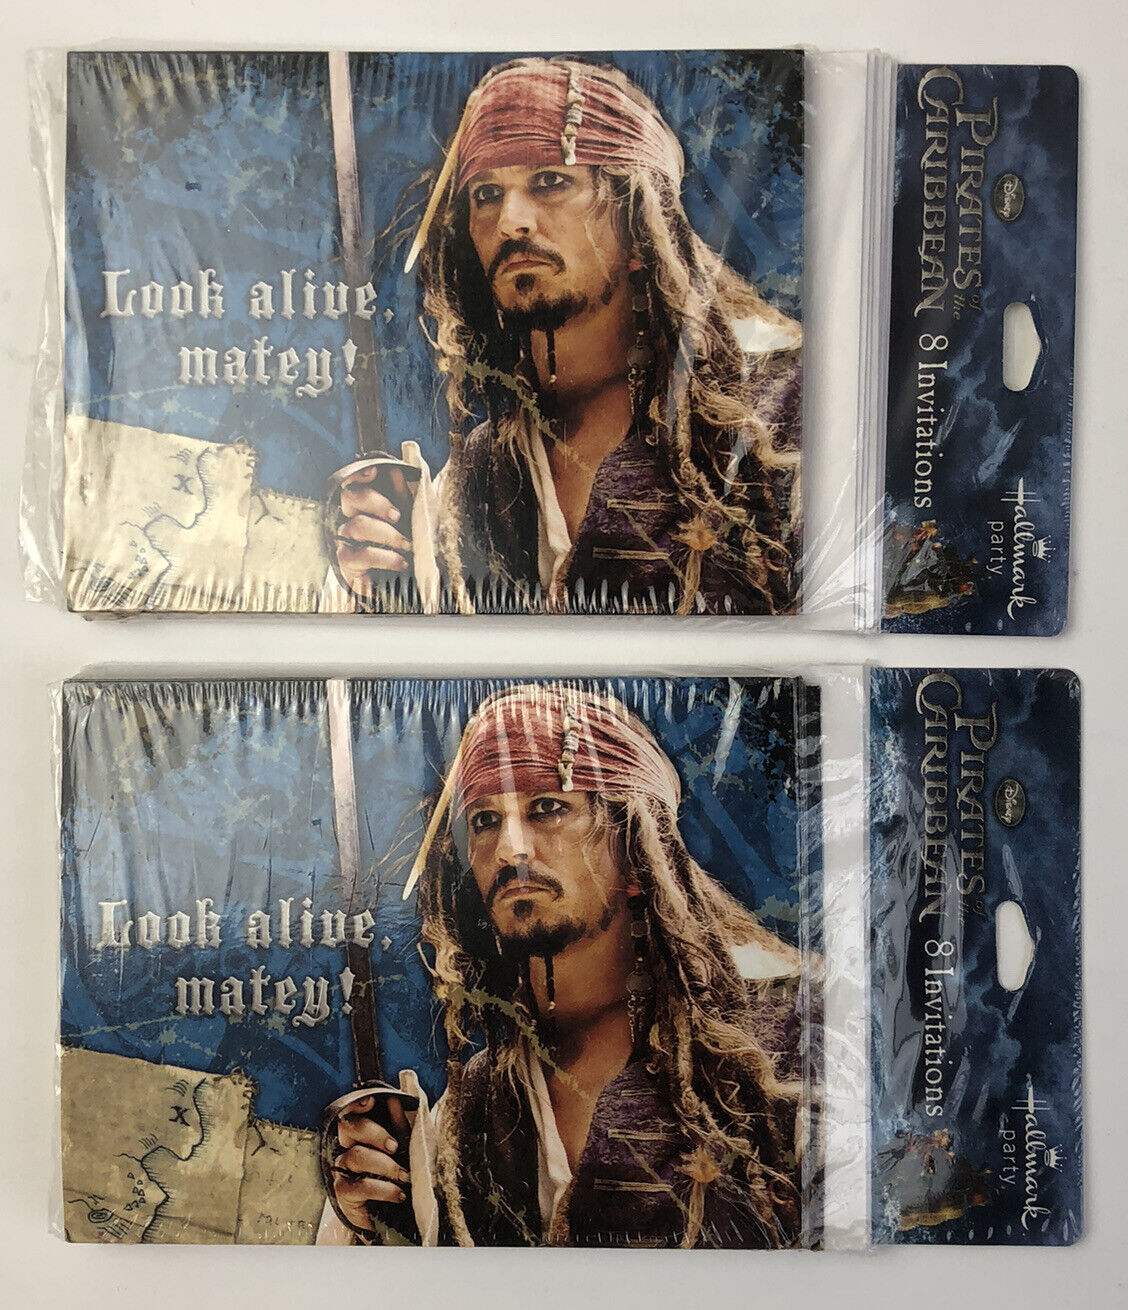 Lot of 2 Packs of Pirates of the Caribbean Birthday Party Invitations NEW Pirates of the Caribbean